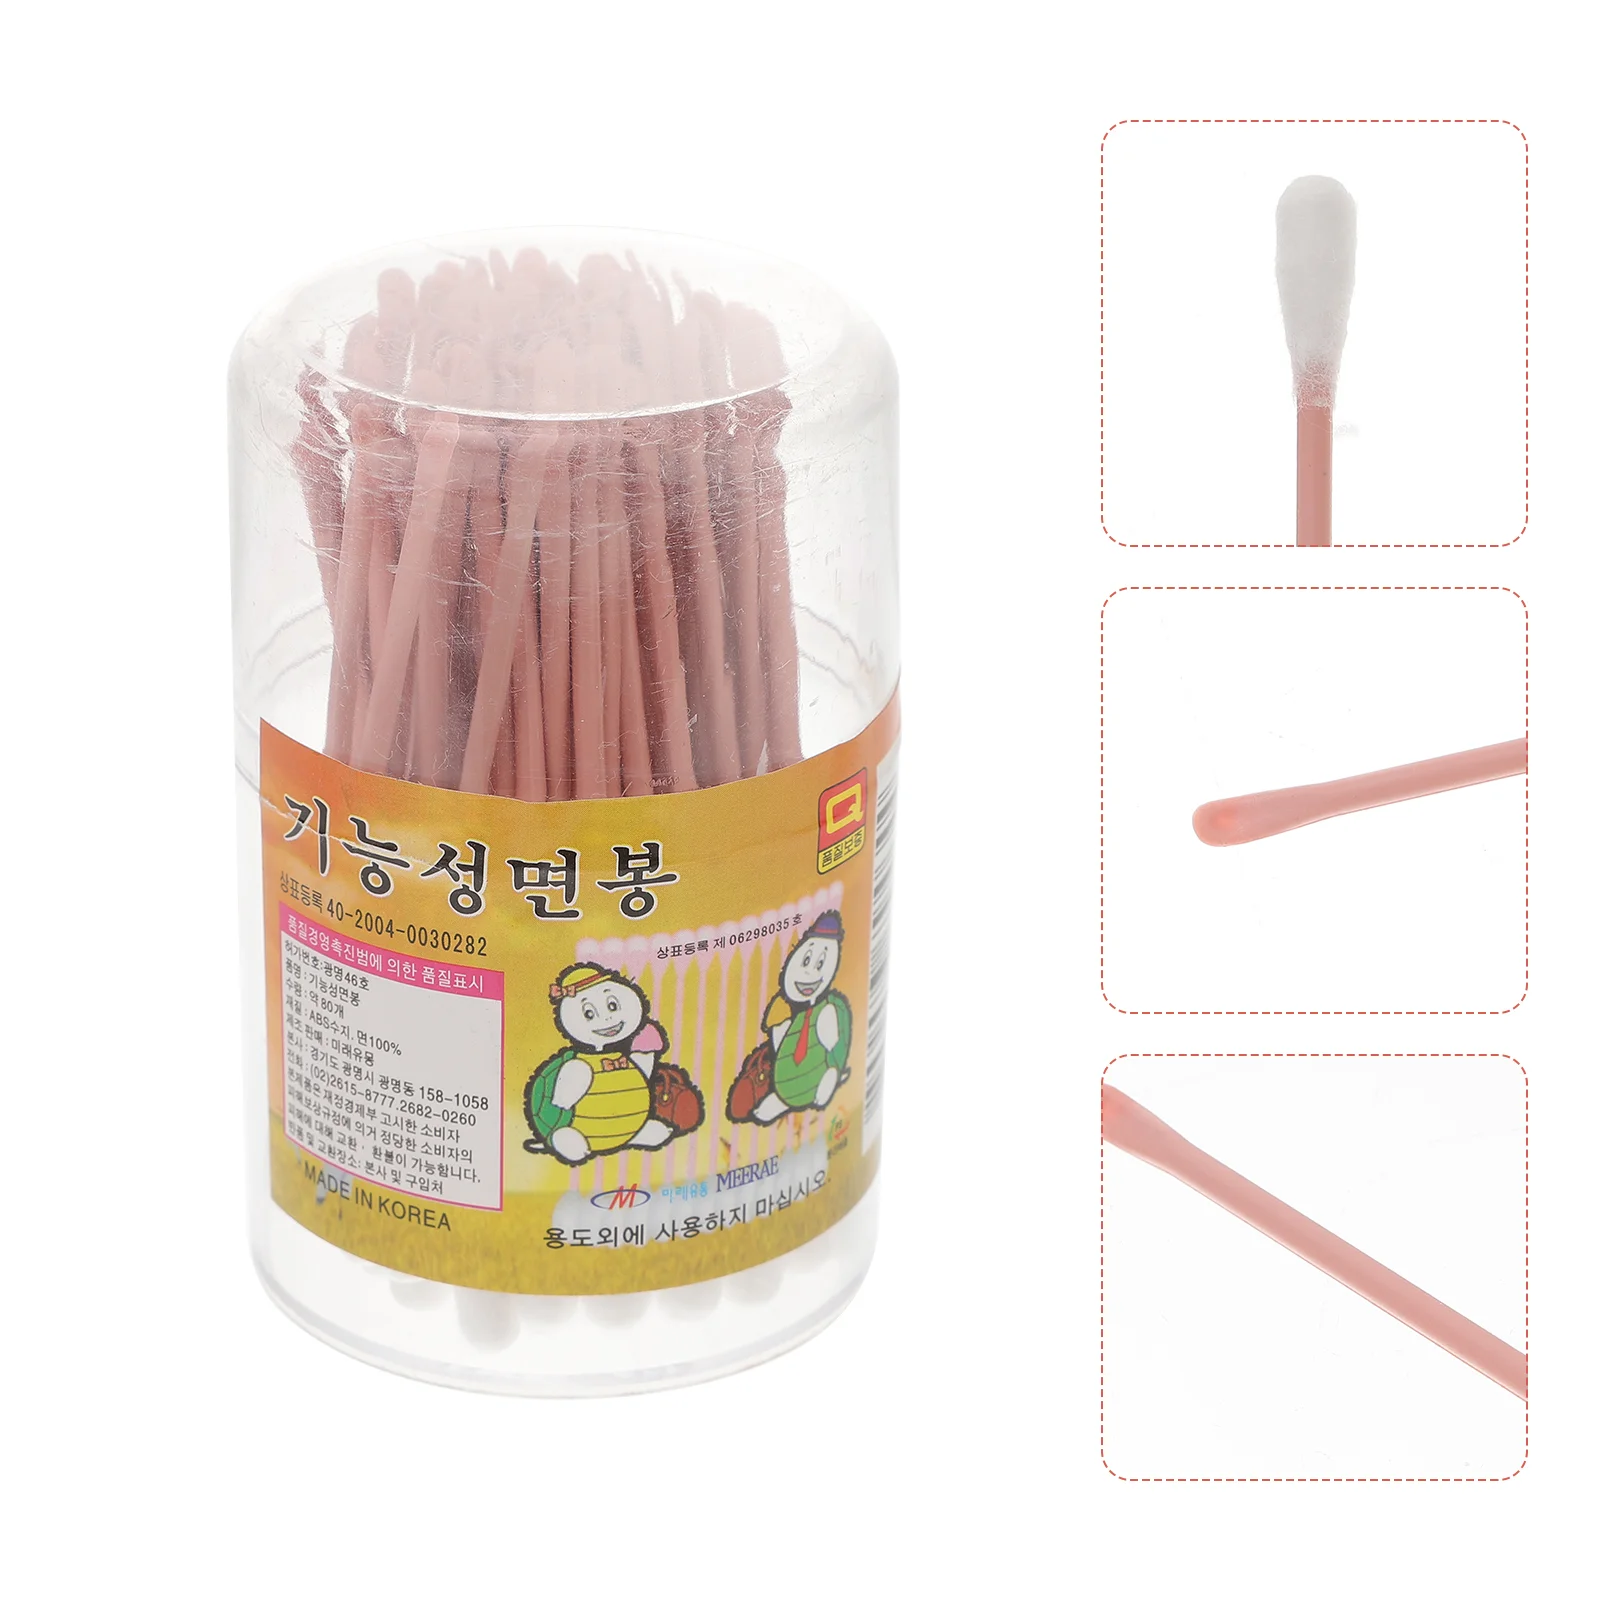 

80pcs Double Head Cotton Swabs Ear Clean Tools Makeup Cotton Tip Supplies with a Round Box